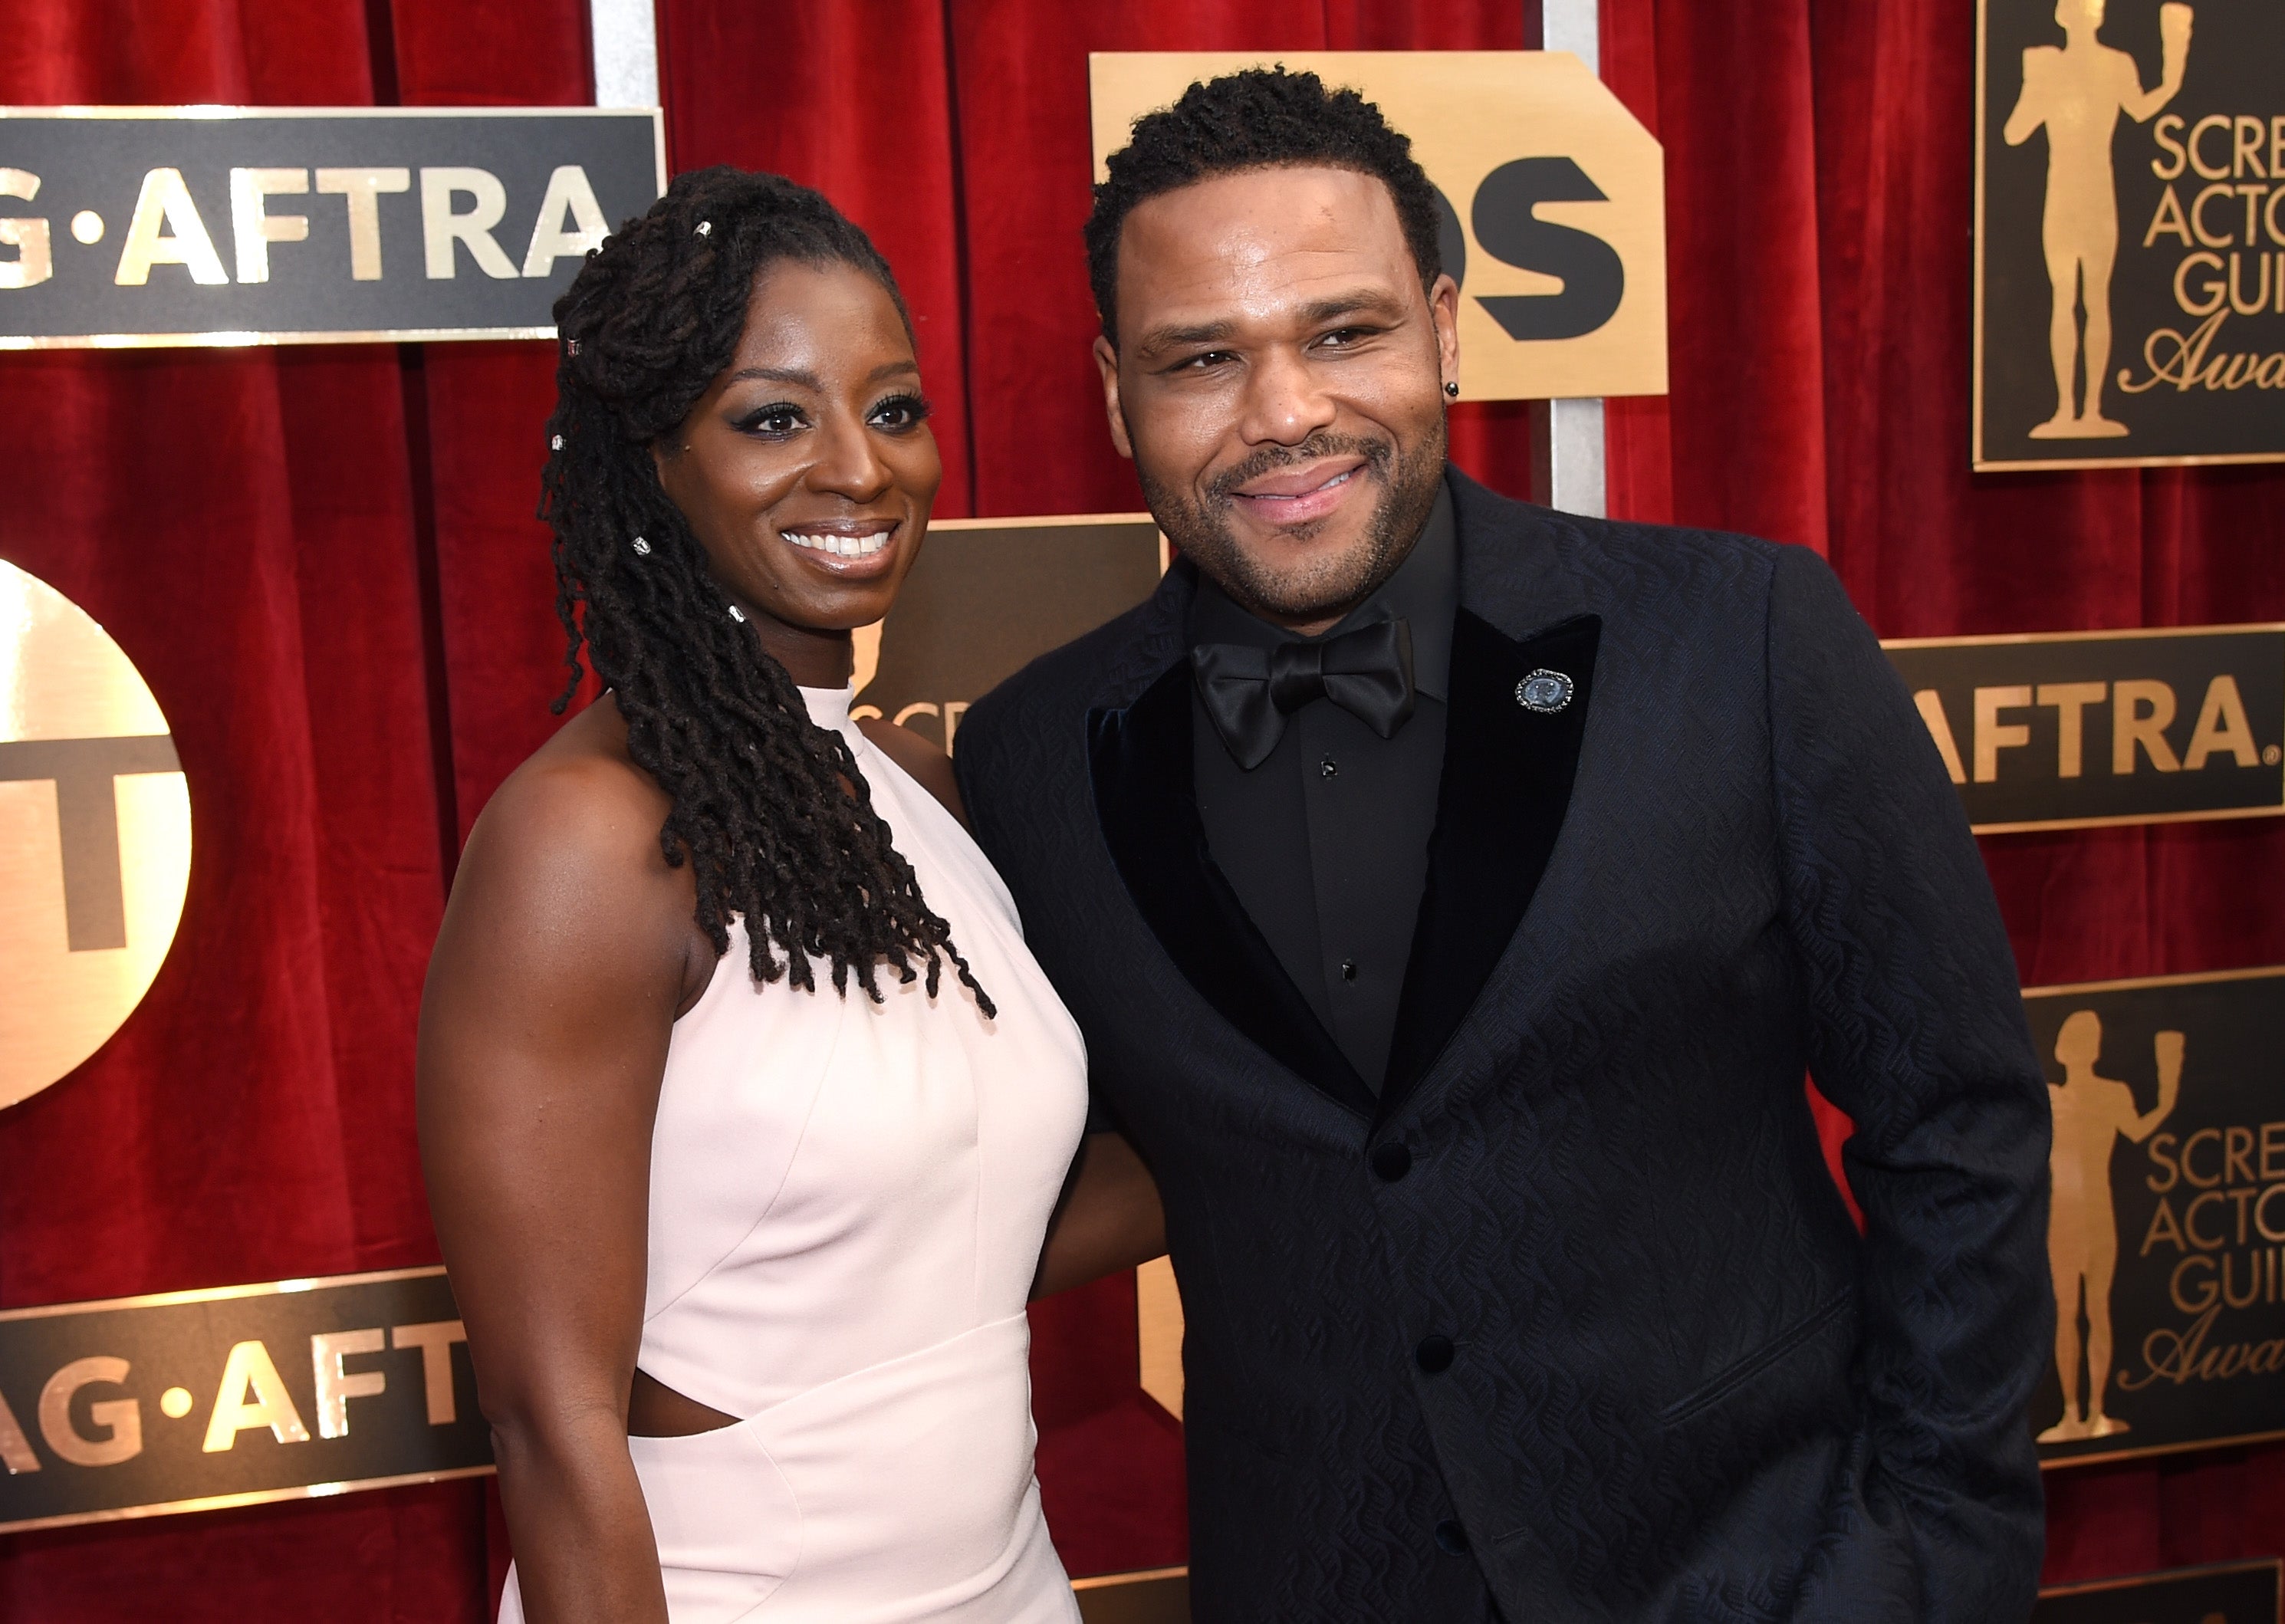 Black Love Wins On the Red Carpet at The 2017 SAG Awards
